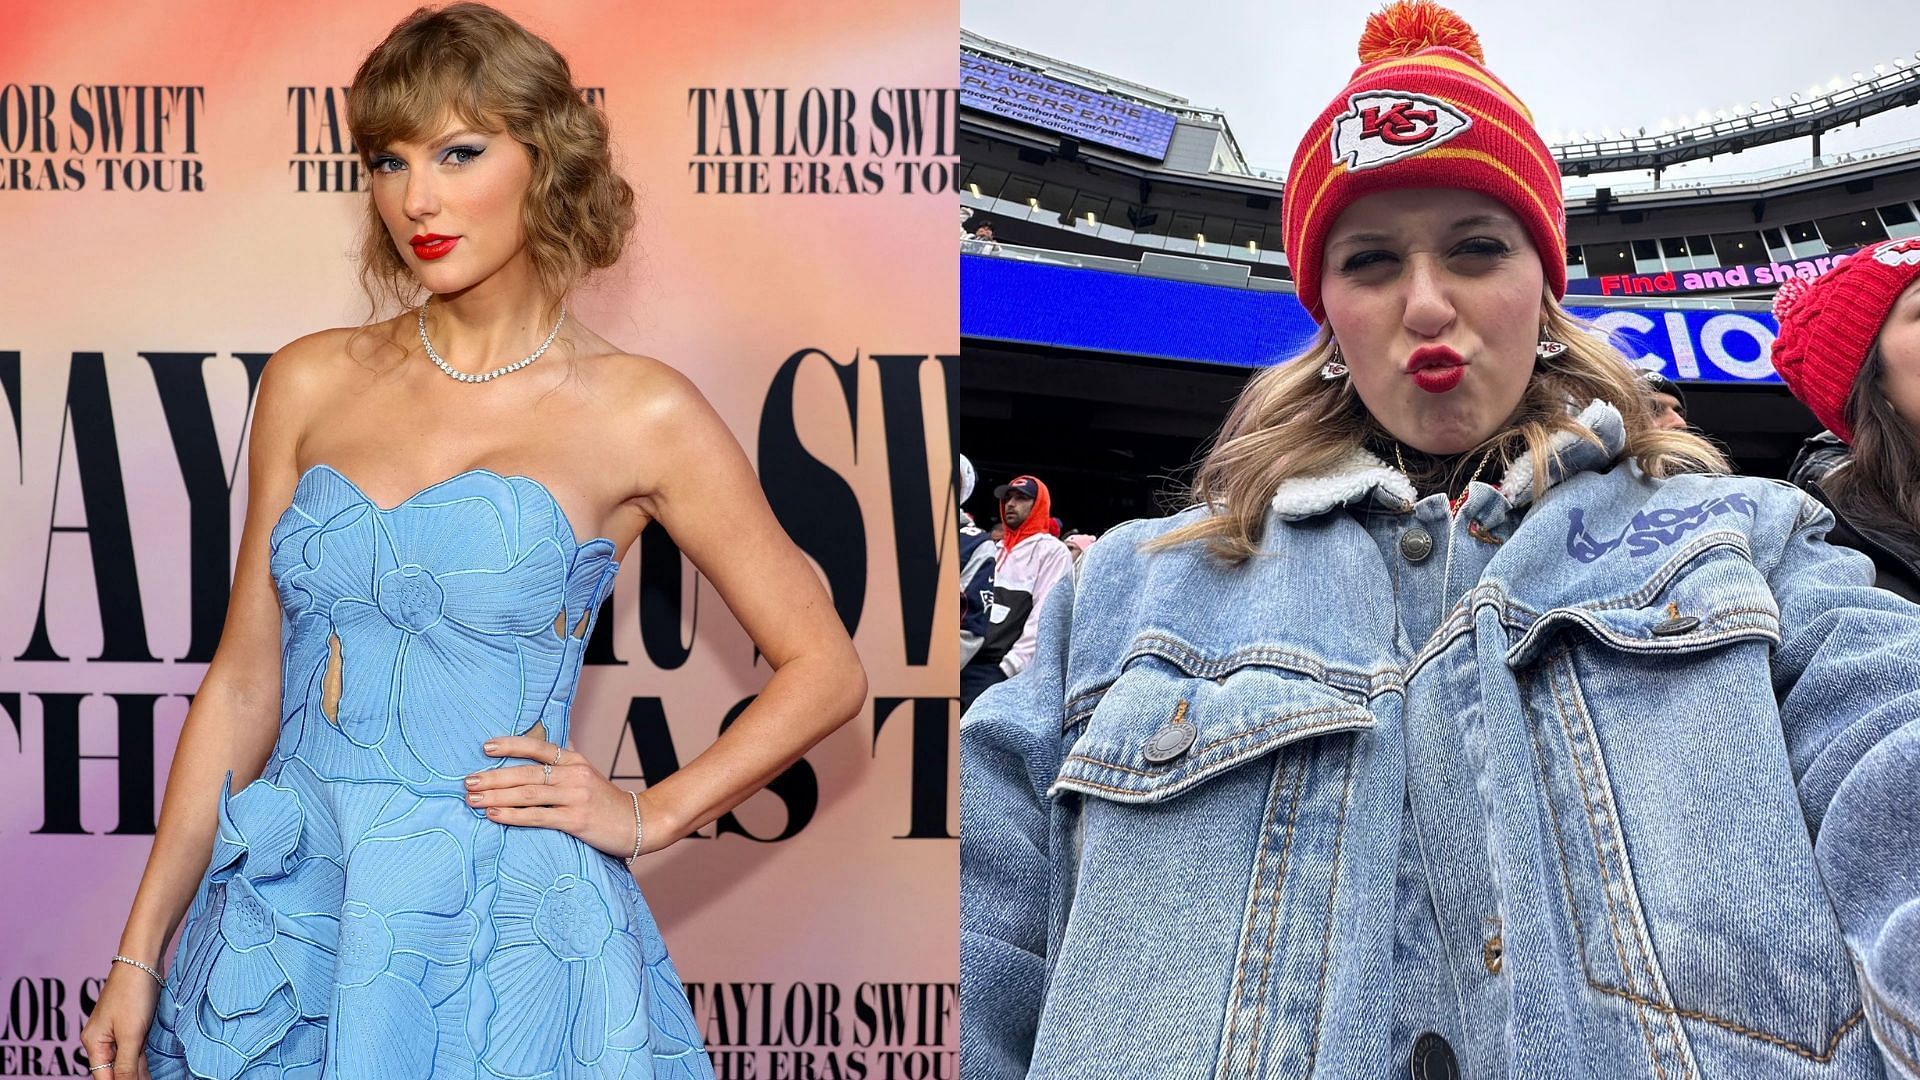 A fan named Sara was verbally bullied for wearing Kansas City Chiefs gear and an official Taylor Swift denim jacket to the Week 15 Chiefs-Patriots game at Gillette Stadium. (Image credit: @cleantvv on Twitter)